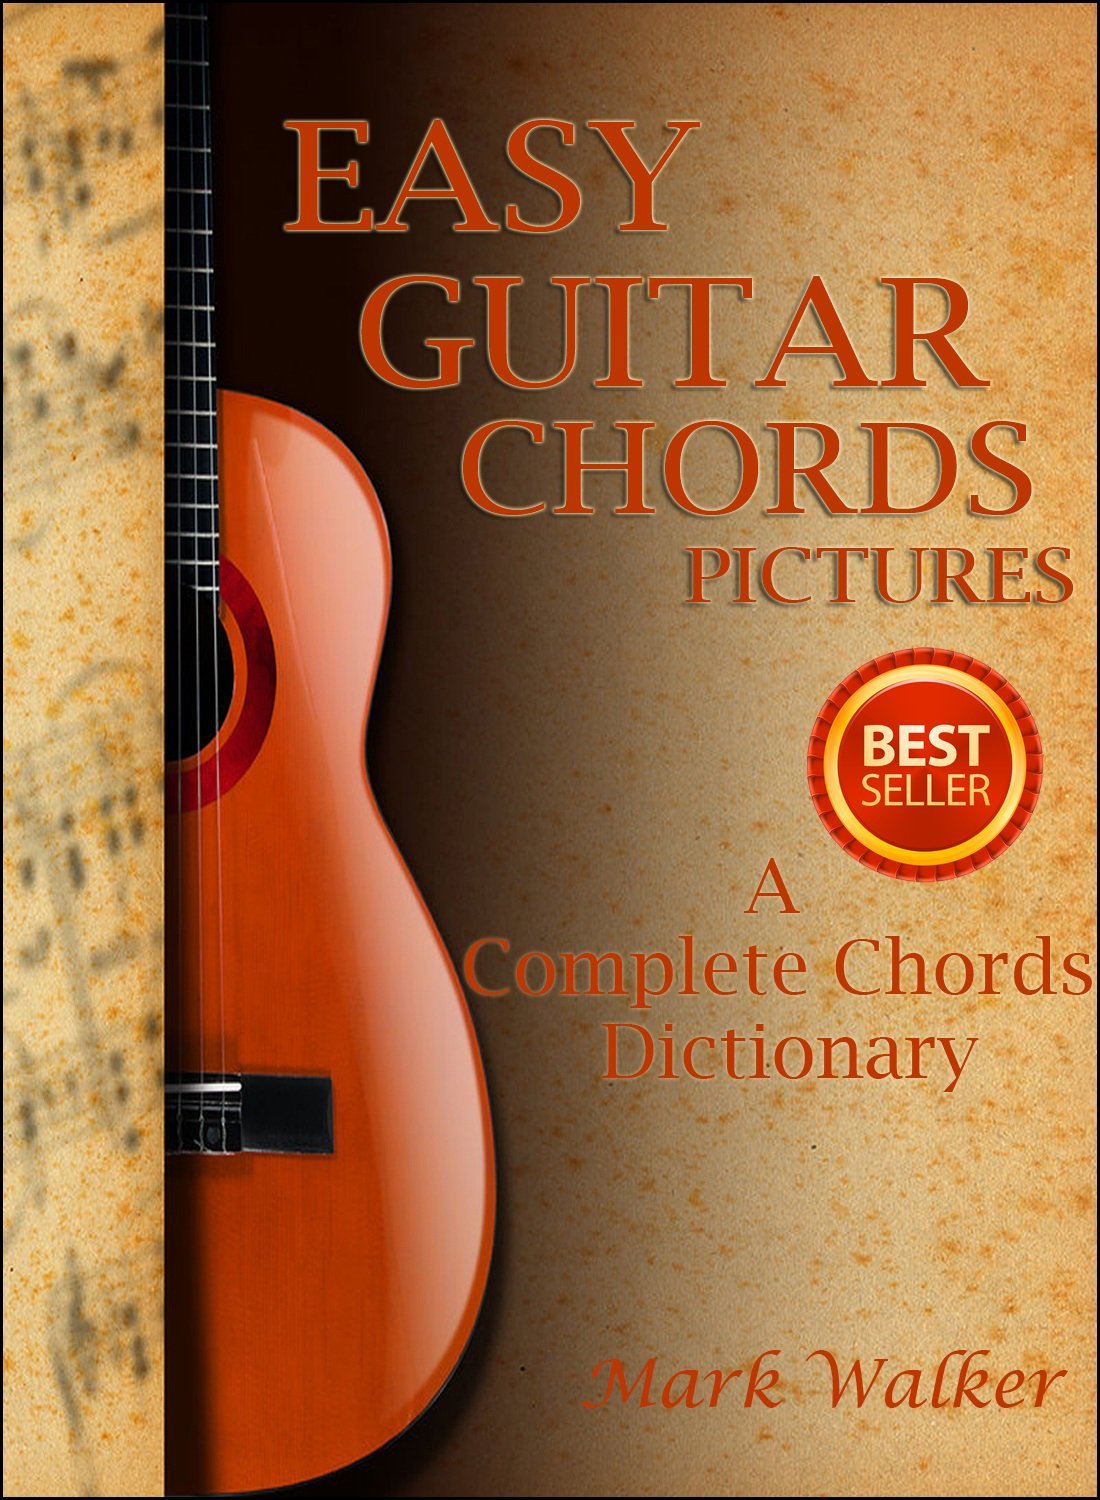 Easy Guitar Chords Pictures: A Complete Chords Dictionary by Mark Walker